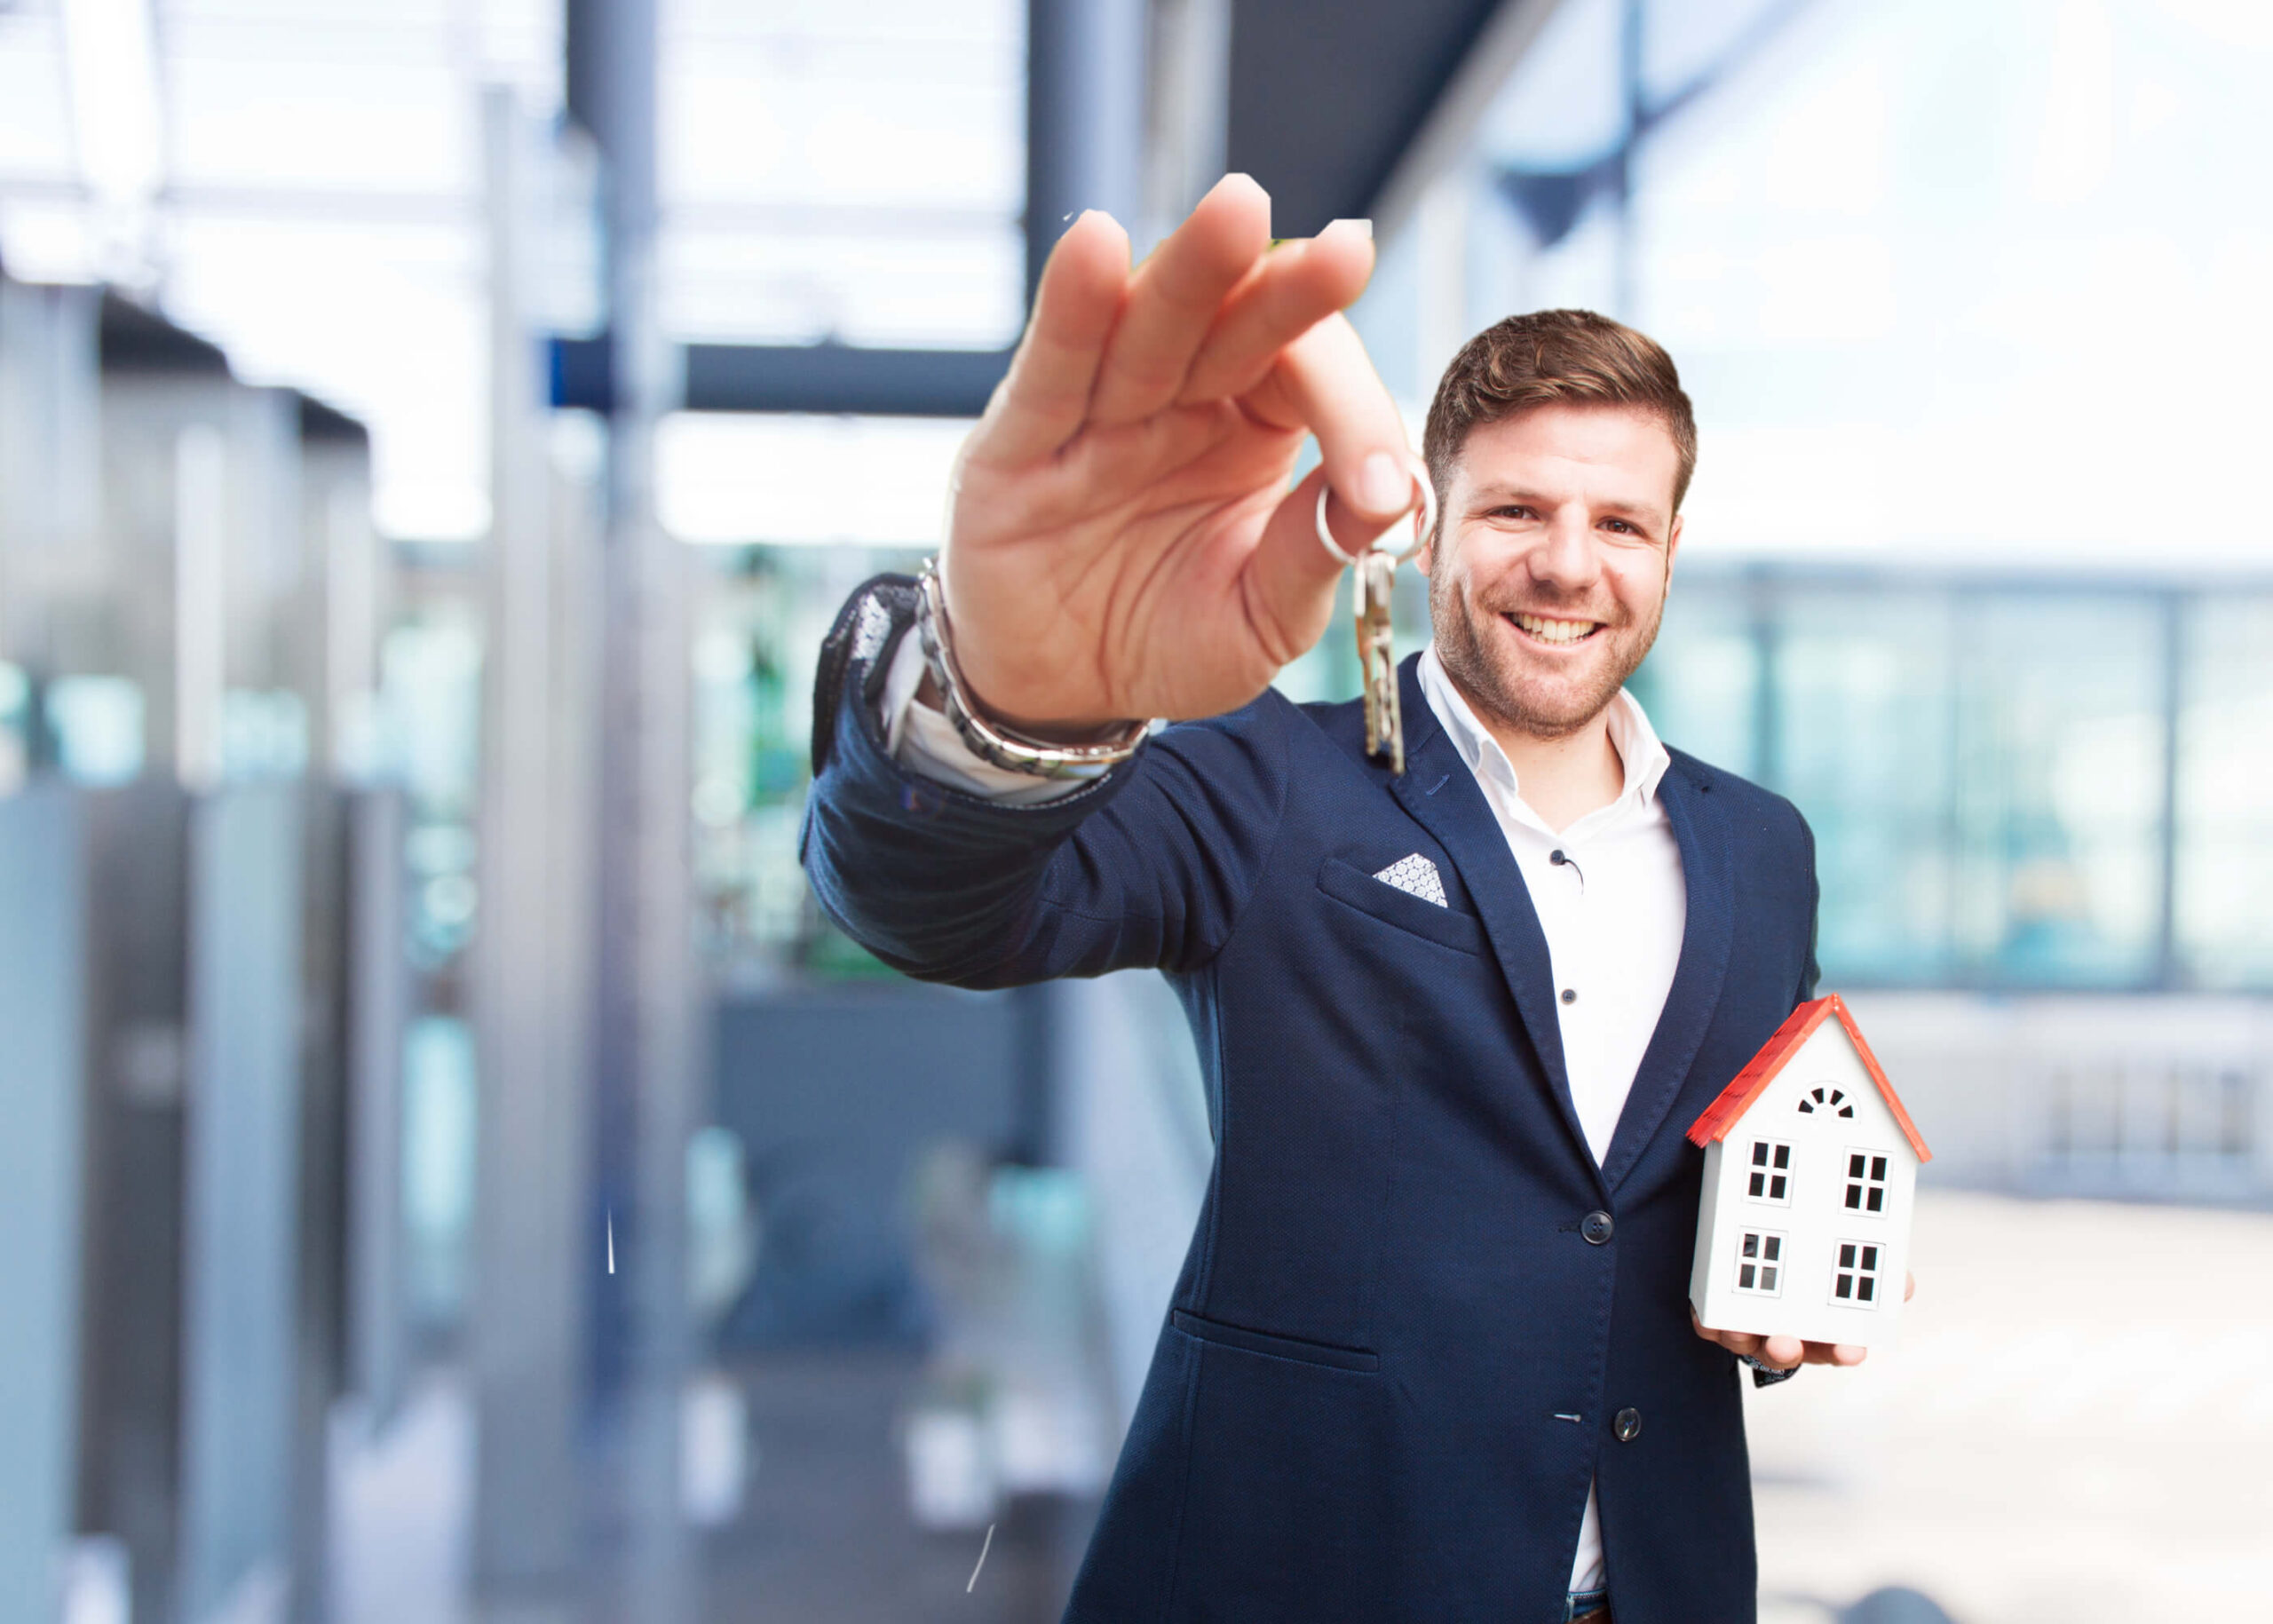 How to Become an Estate Agent/Realtor